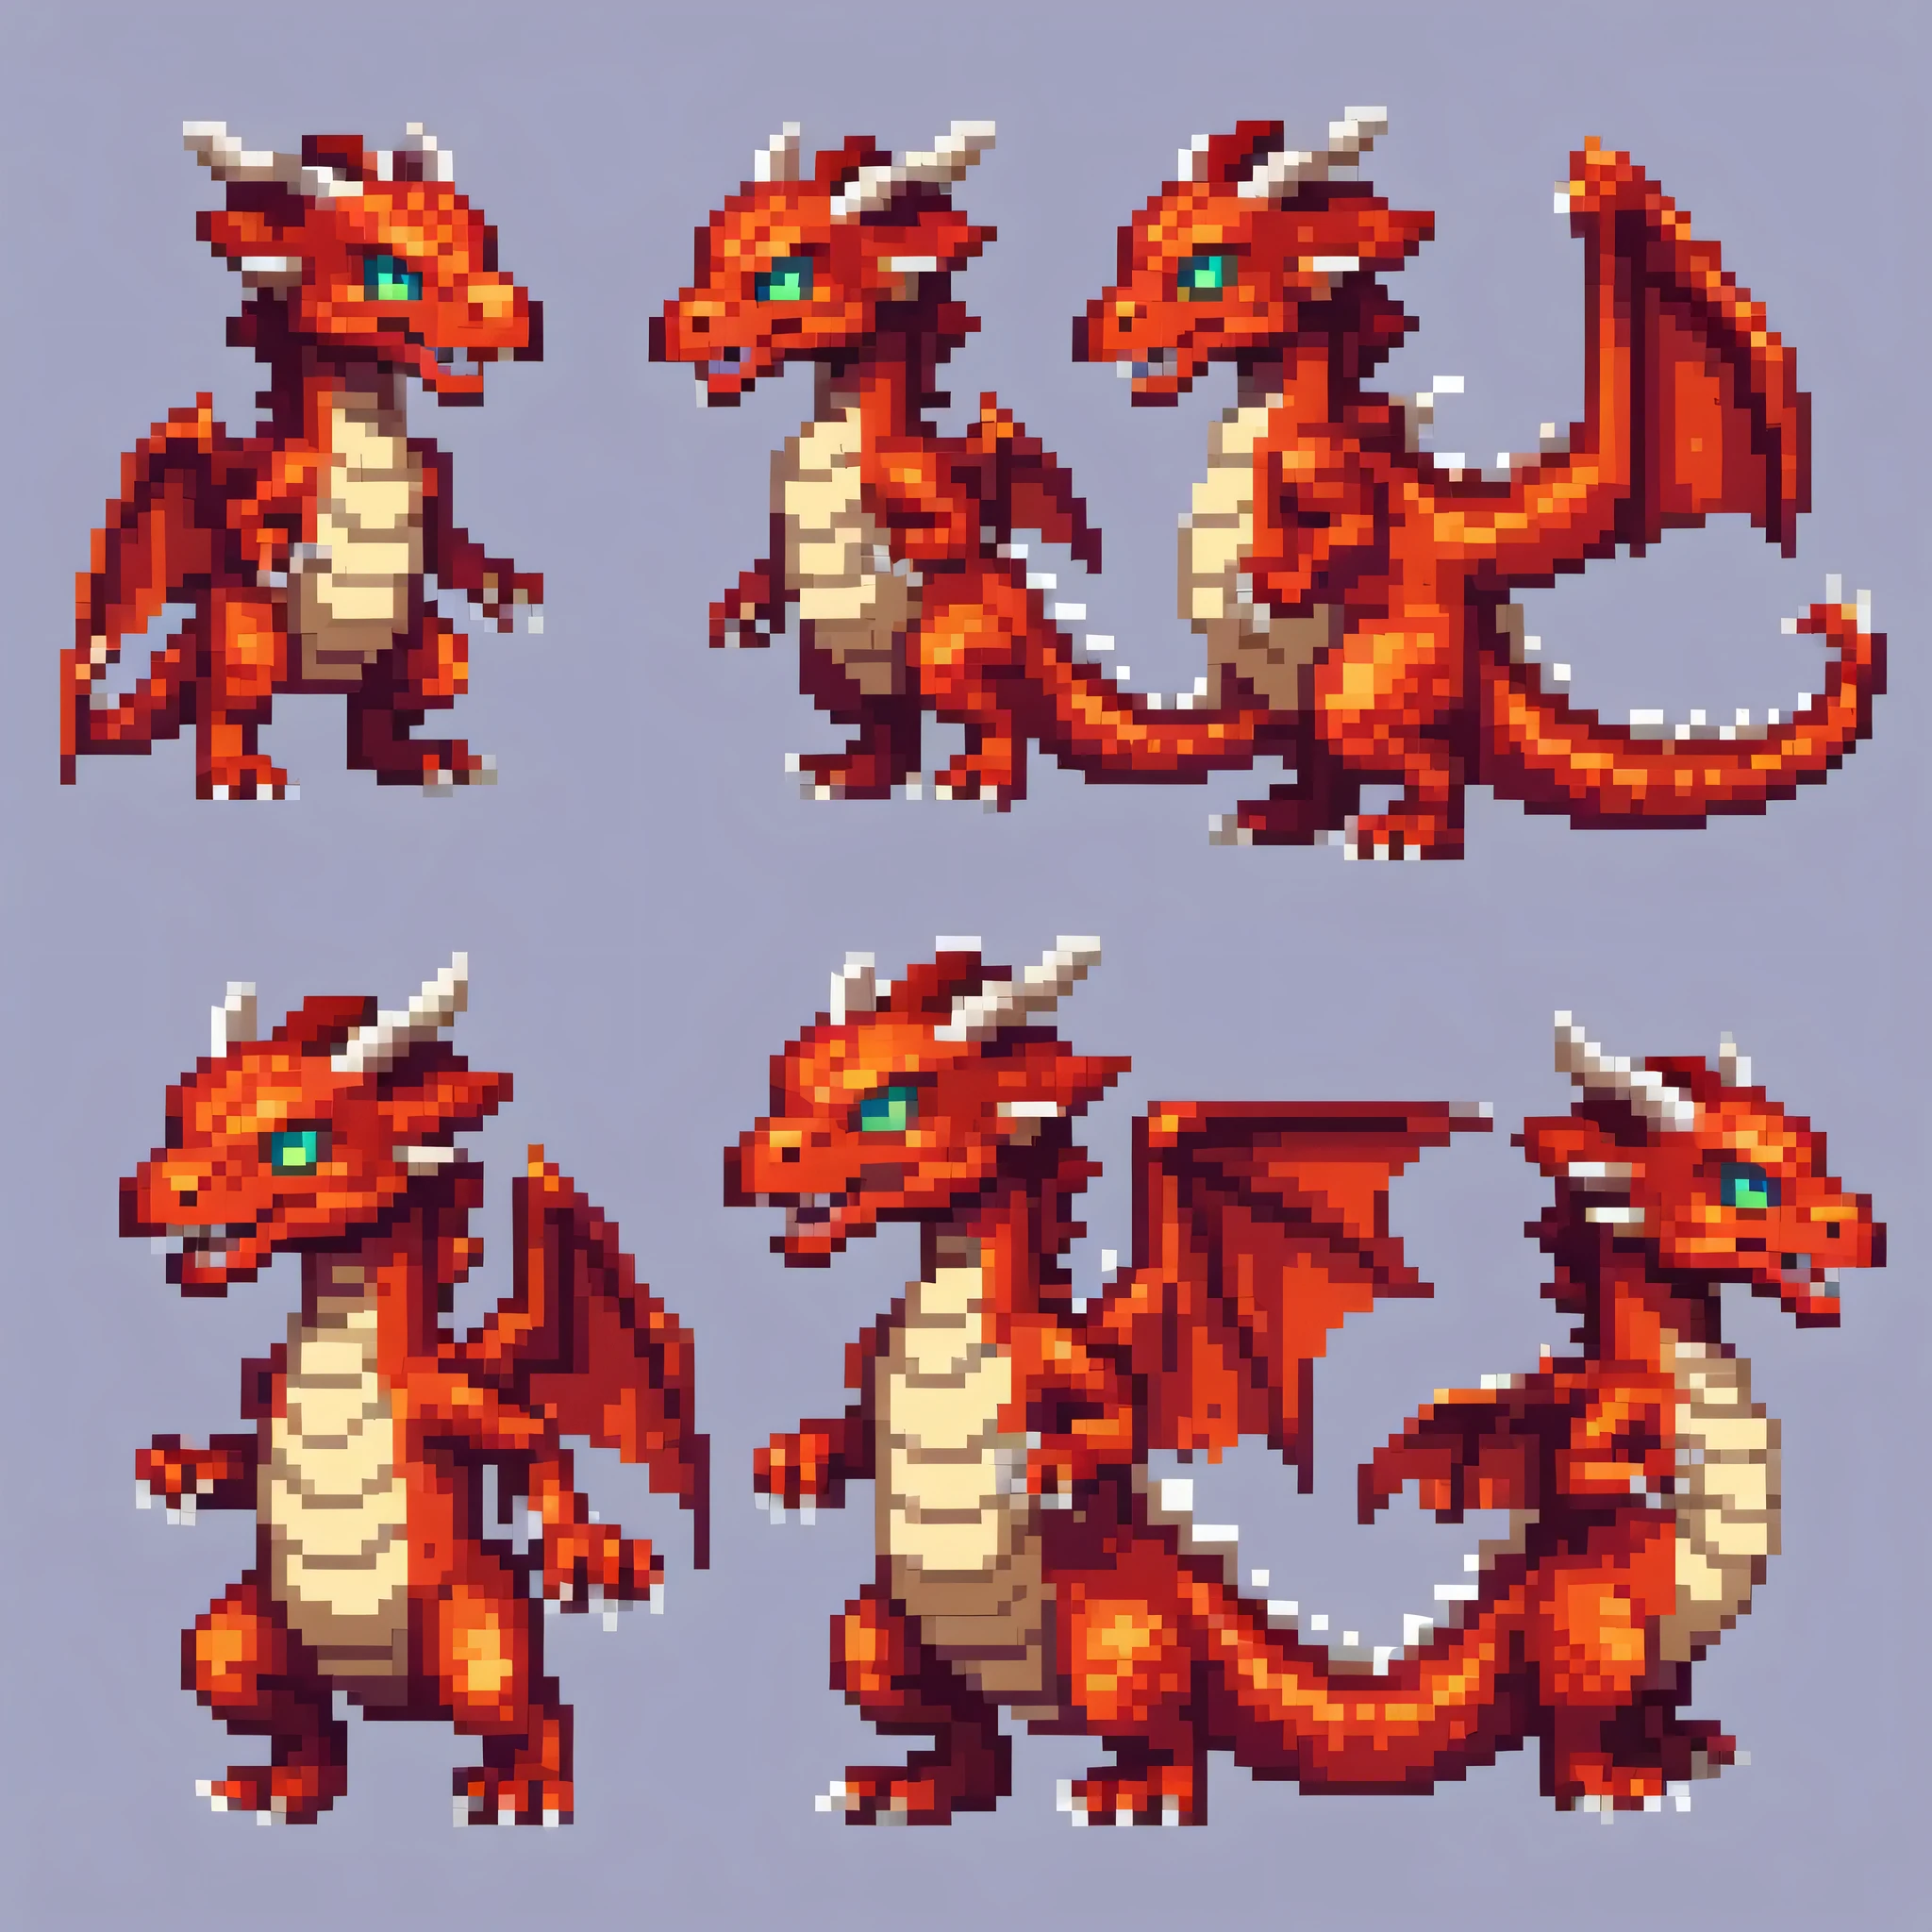 Pixel art,Pixel art,Create a character design sheet,dragon:dragonクエスト:monster:色んな種類のdragonを並べる,((3 views,whole body, background,multiple views,High resolution)),multiple views,multiple poses,Active,action pose,dynamic,nice,cute,masterpiece,highest quality,In detail,Gracefully,RPG,Famicom,multiple characters,multiple costumes,dragonクエスト,boldly,rich colors,colorful